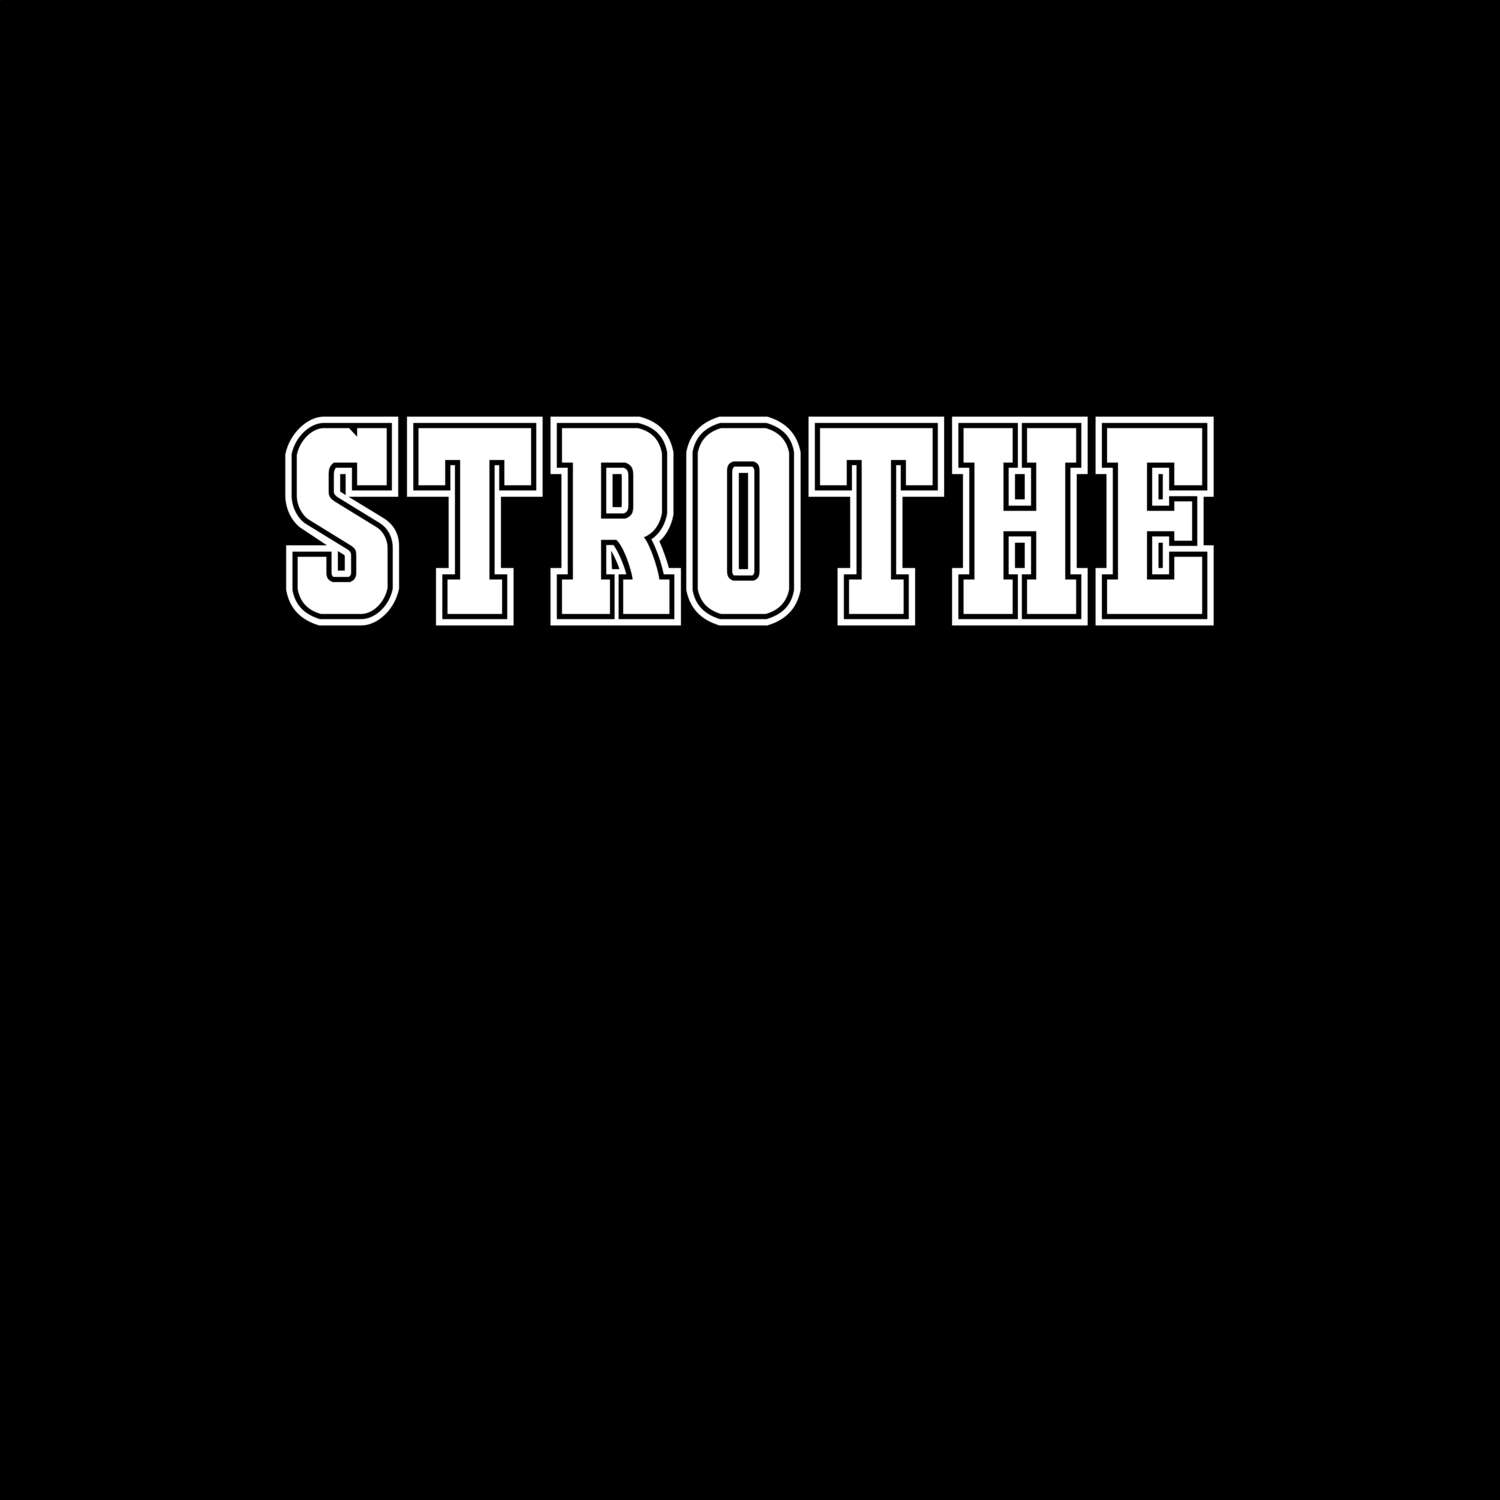 Strothe T-Shirt »Classic«